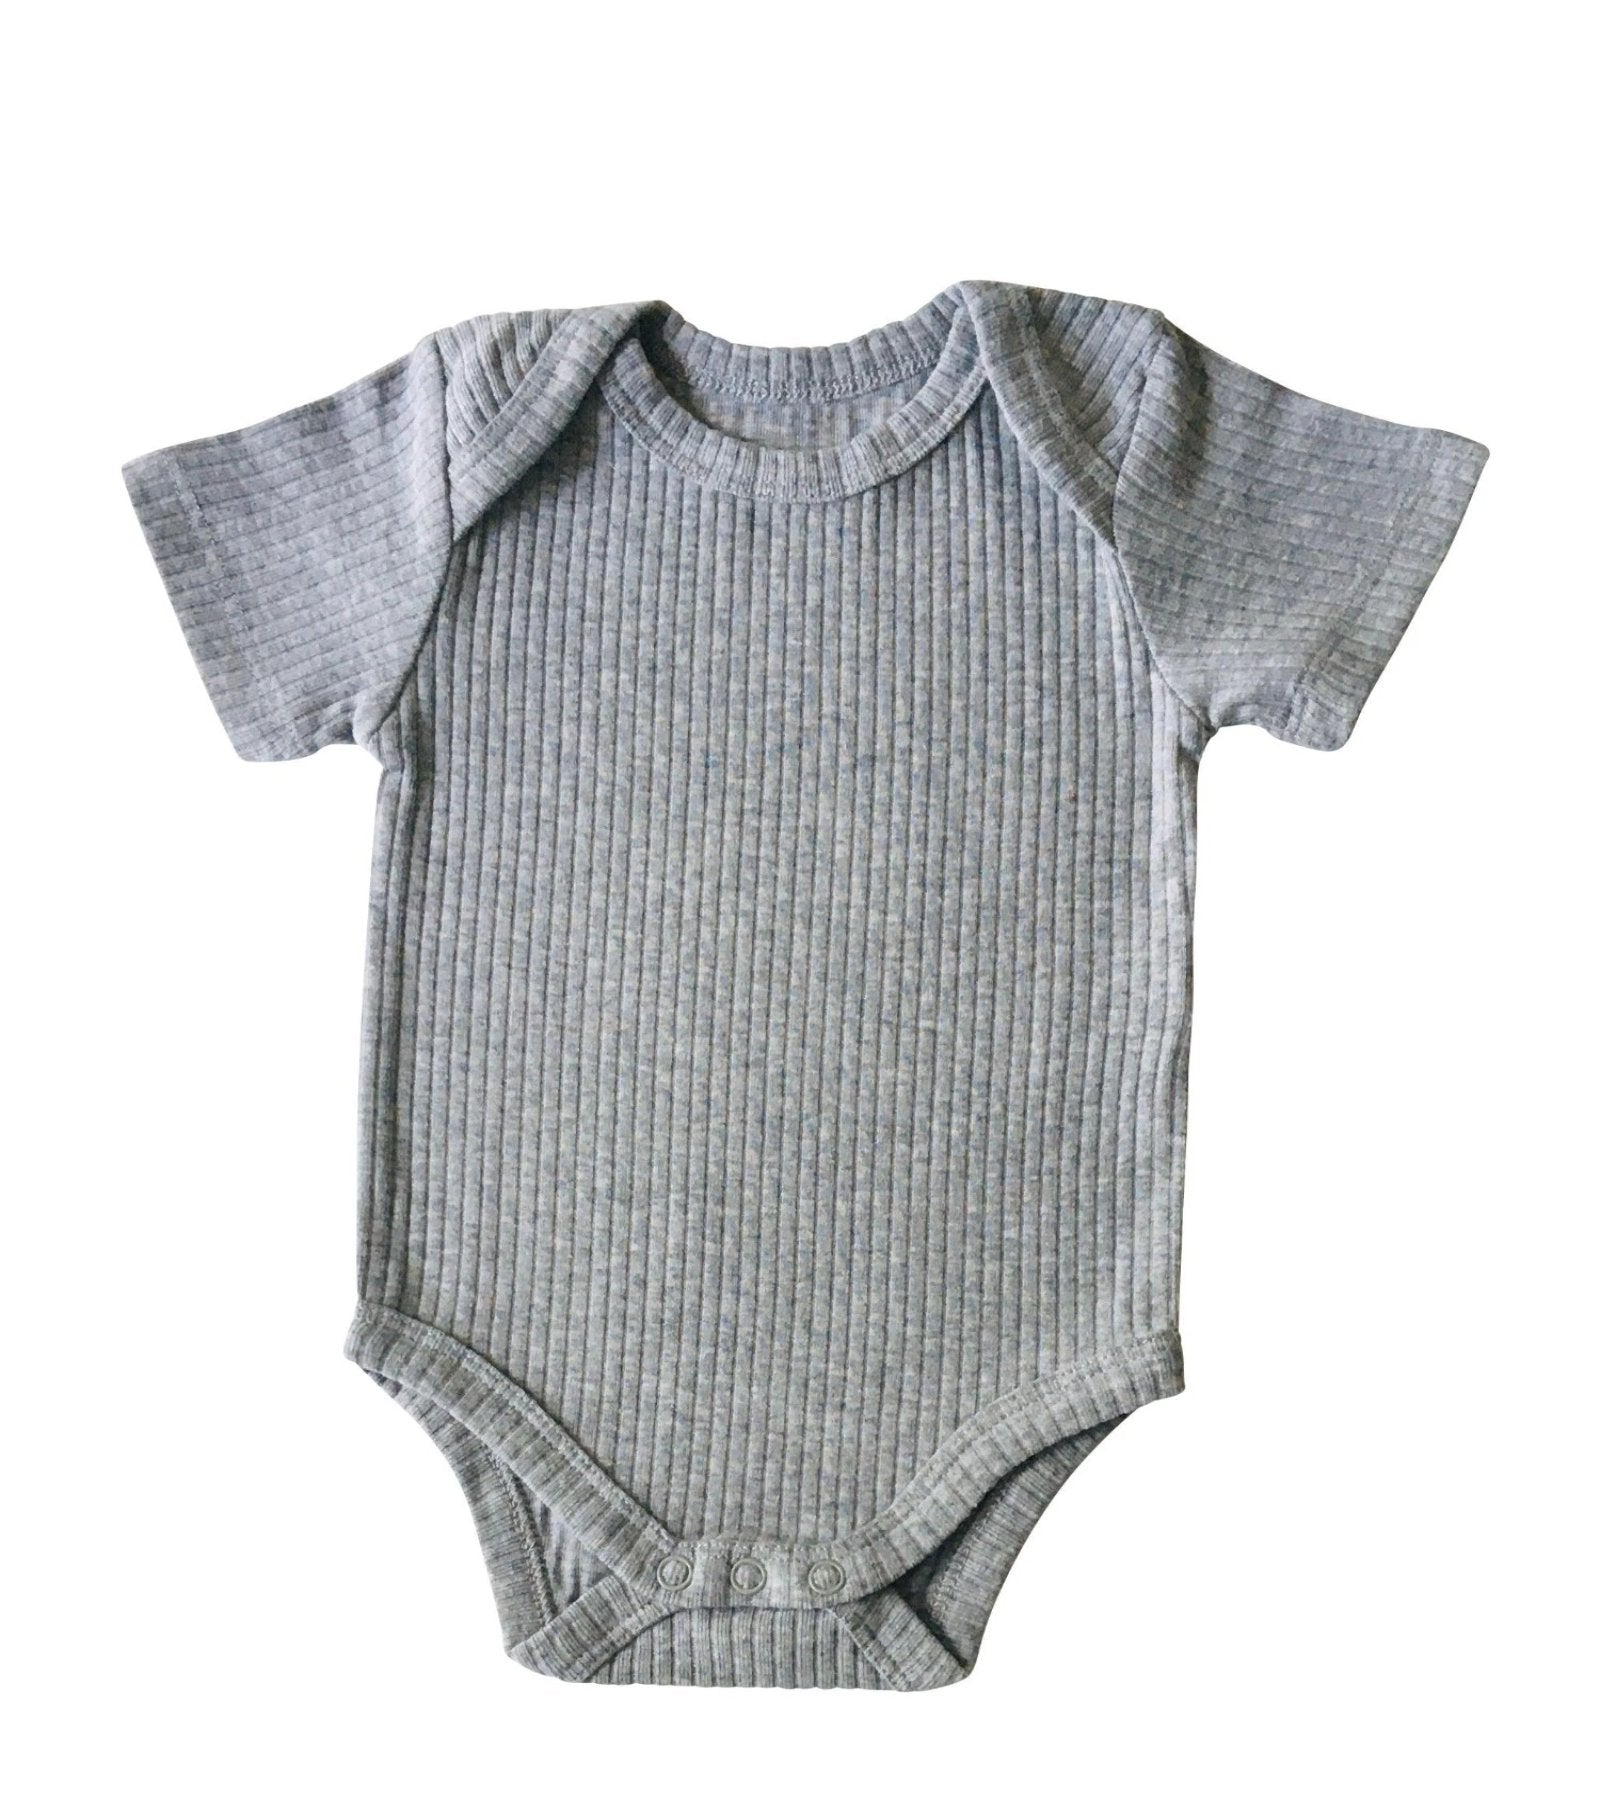 Organic cotton baby onsie in gray.  95% organic cotton, 5% spandex.  Rib knit for extra stretch and comfort.  Snaps at inseam allow for easy diaper changes, envelop shoulders make overhead changes more comfortable.  Eco friendly natural fabric, non-toxic, food grade dyes.  OEKO TEx-100 certified.